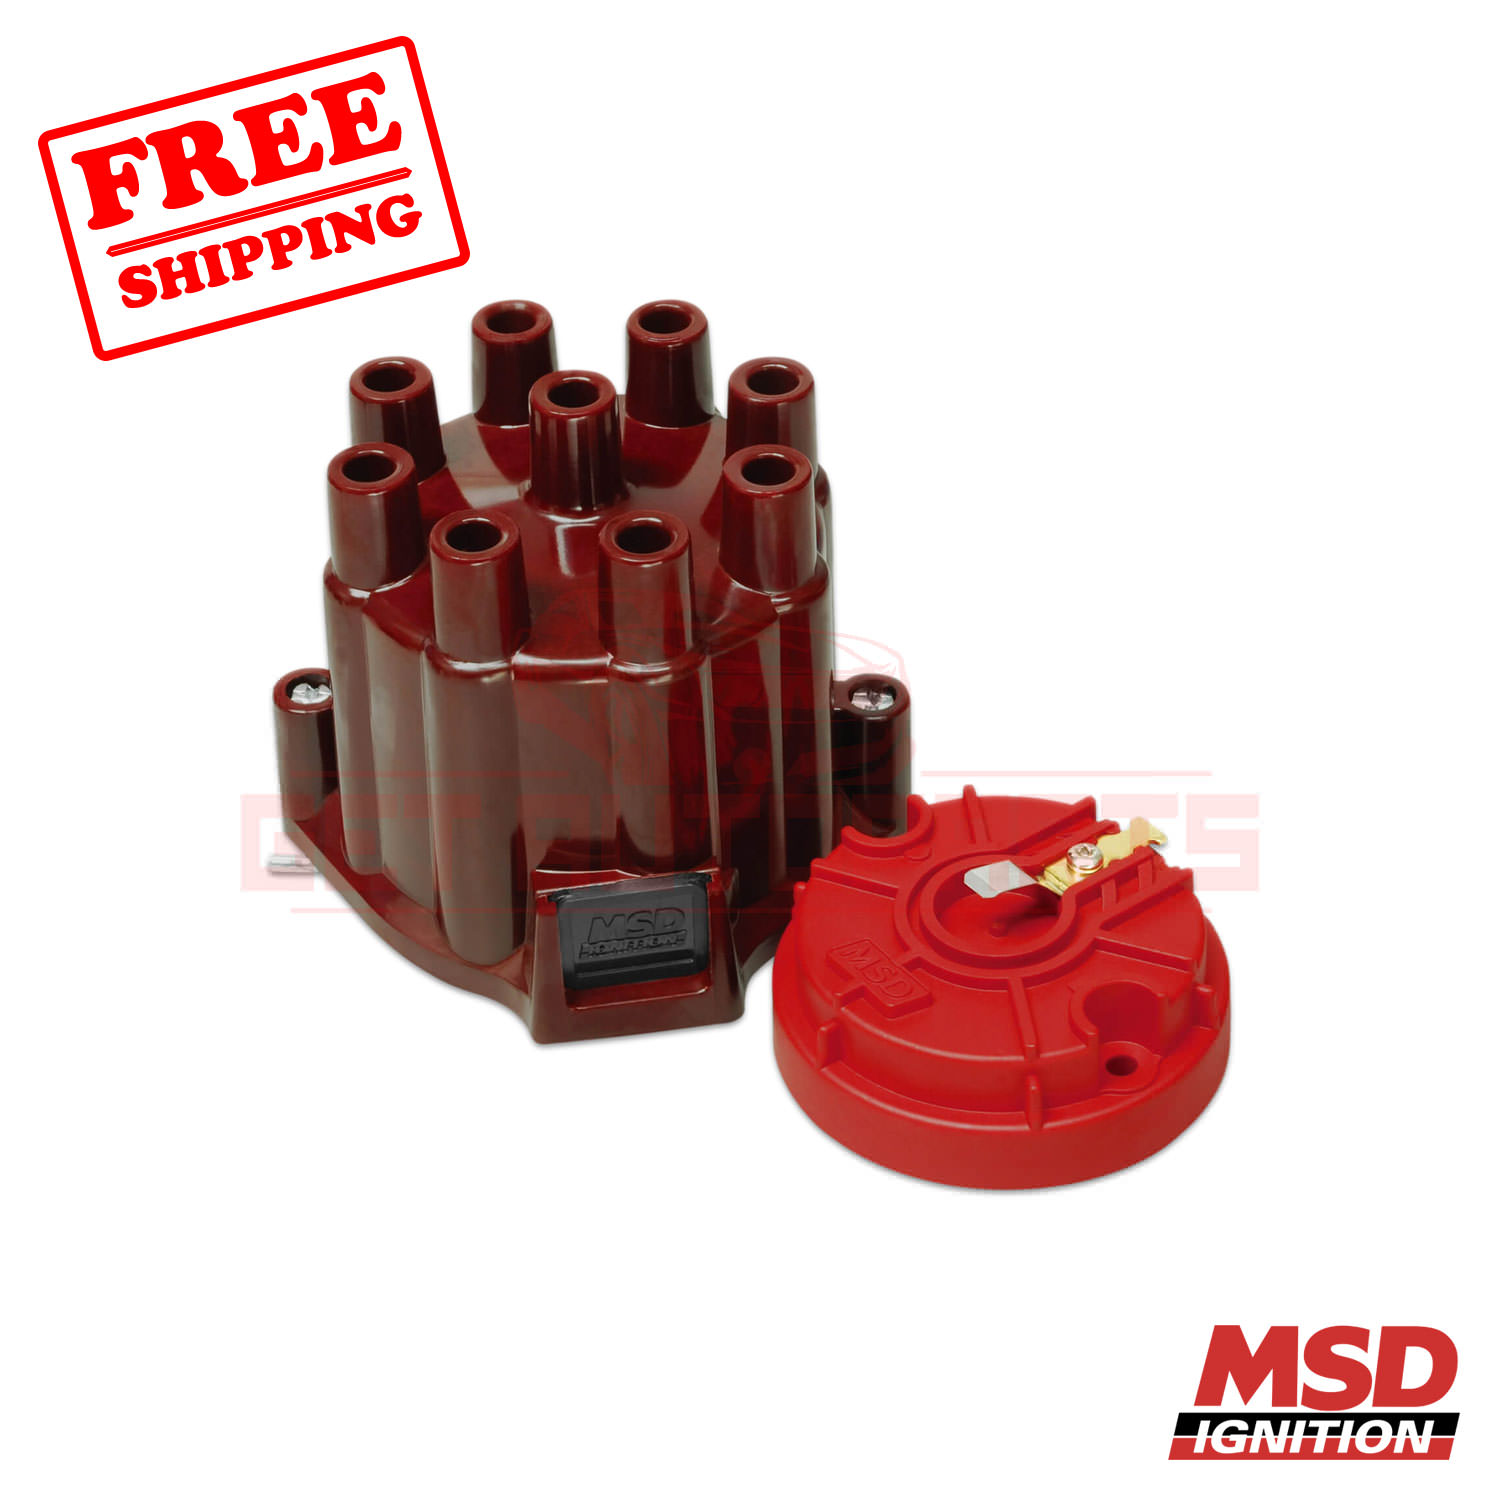 MSD Distributor Cap and Rotor Kit for Chevrolet P20 75-1976